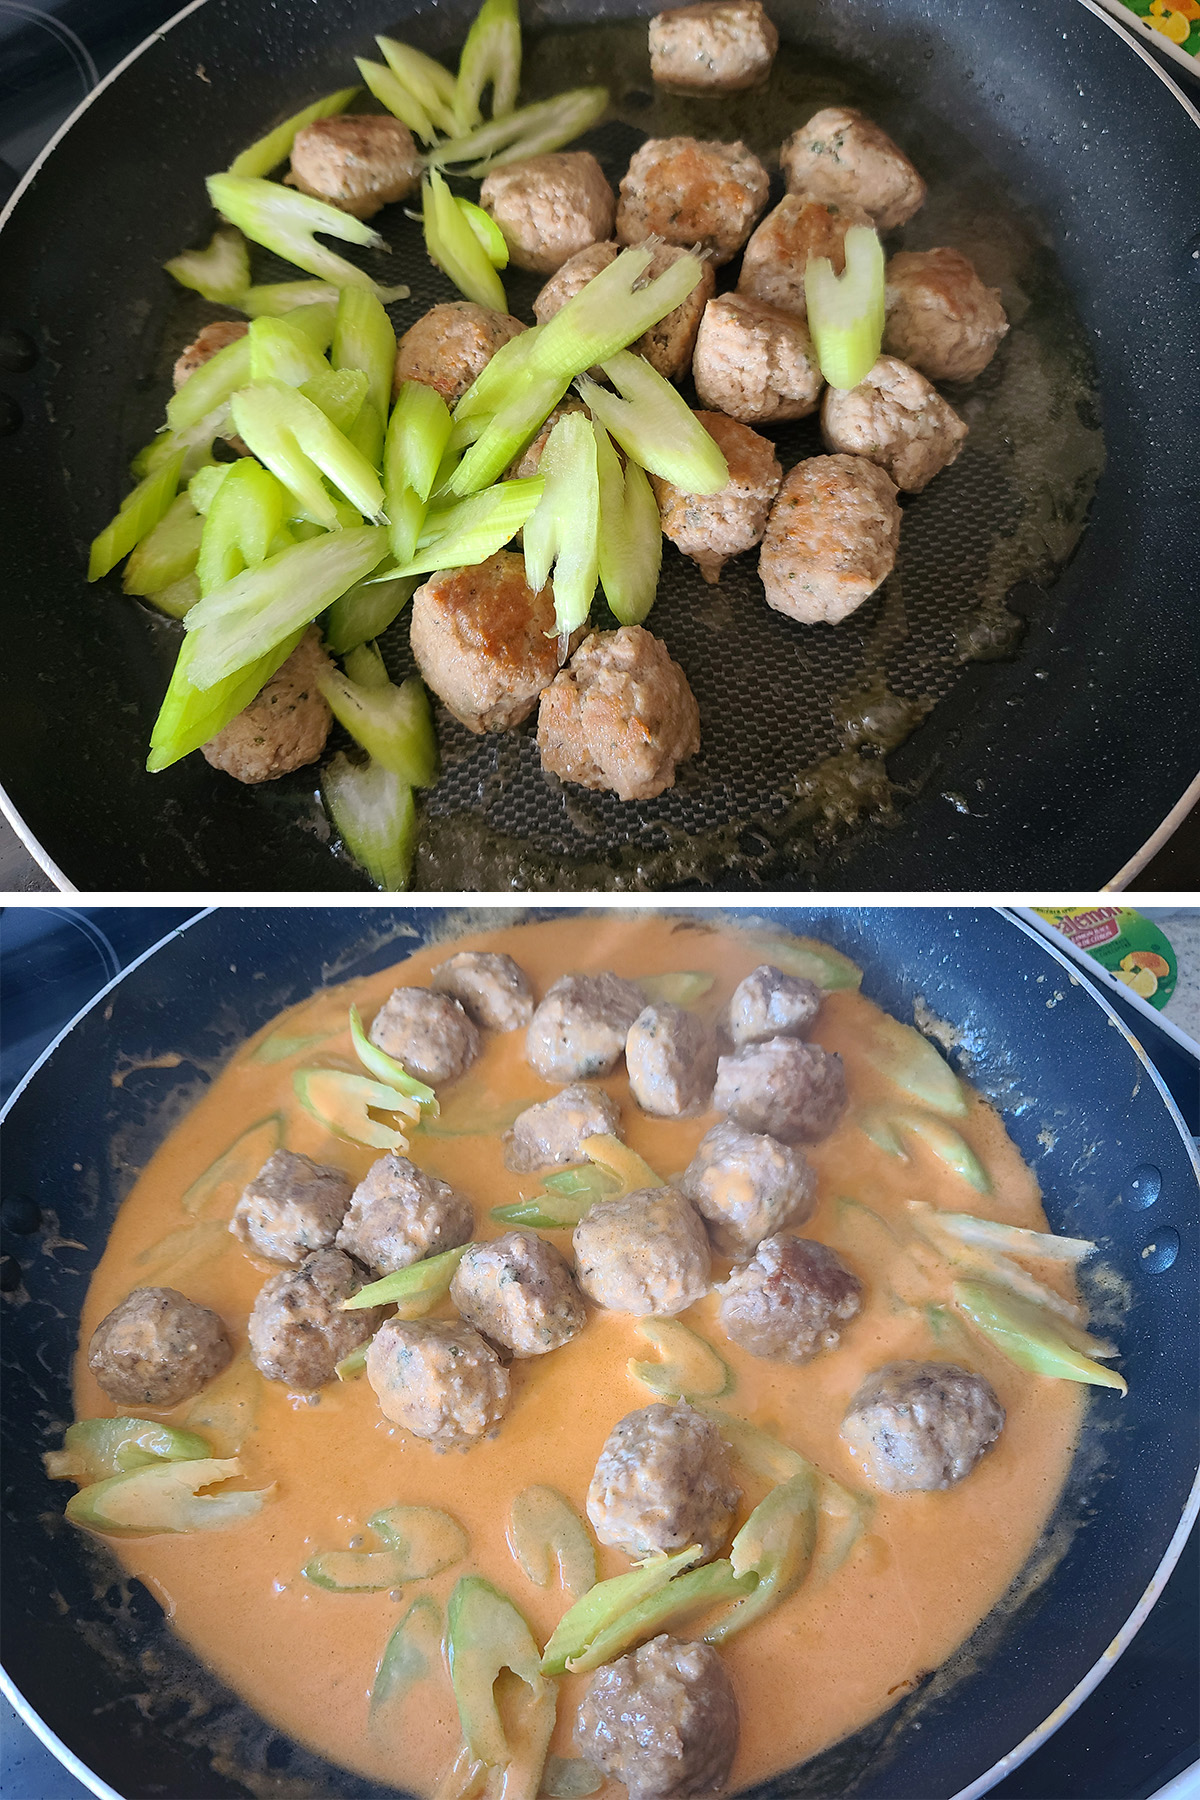 Star treked celery being added to the pan of meatballs, along with the creamy buffalo sauce.